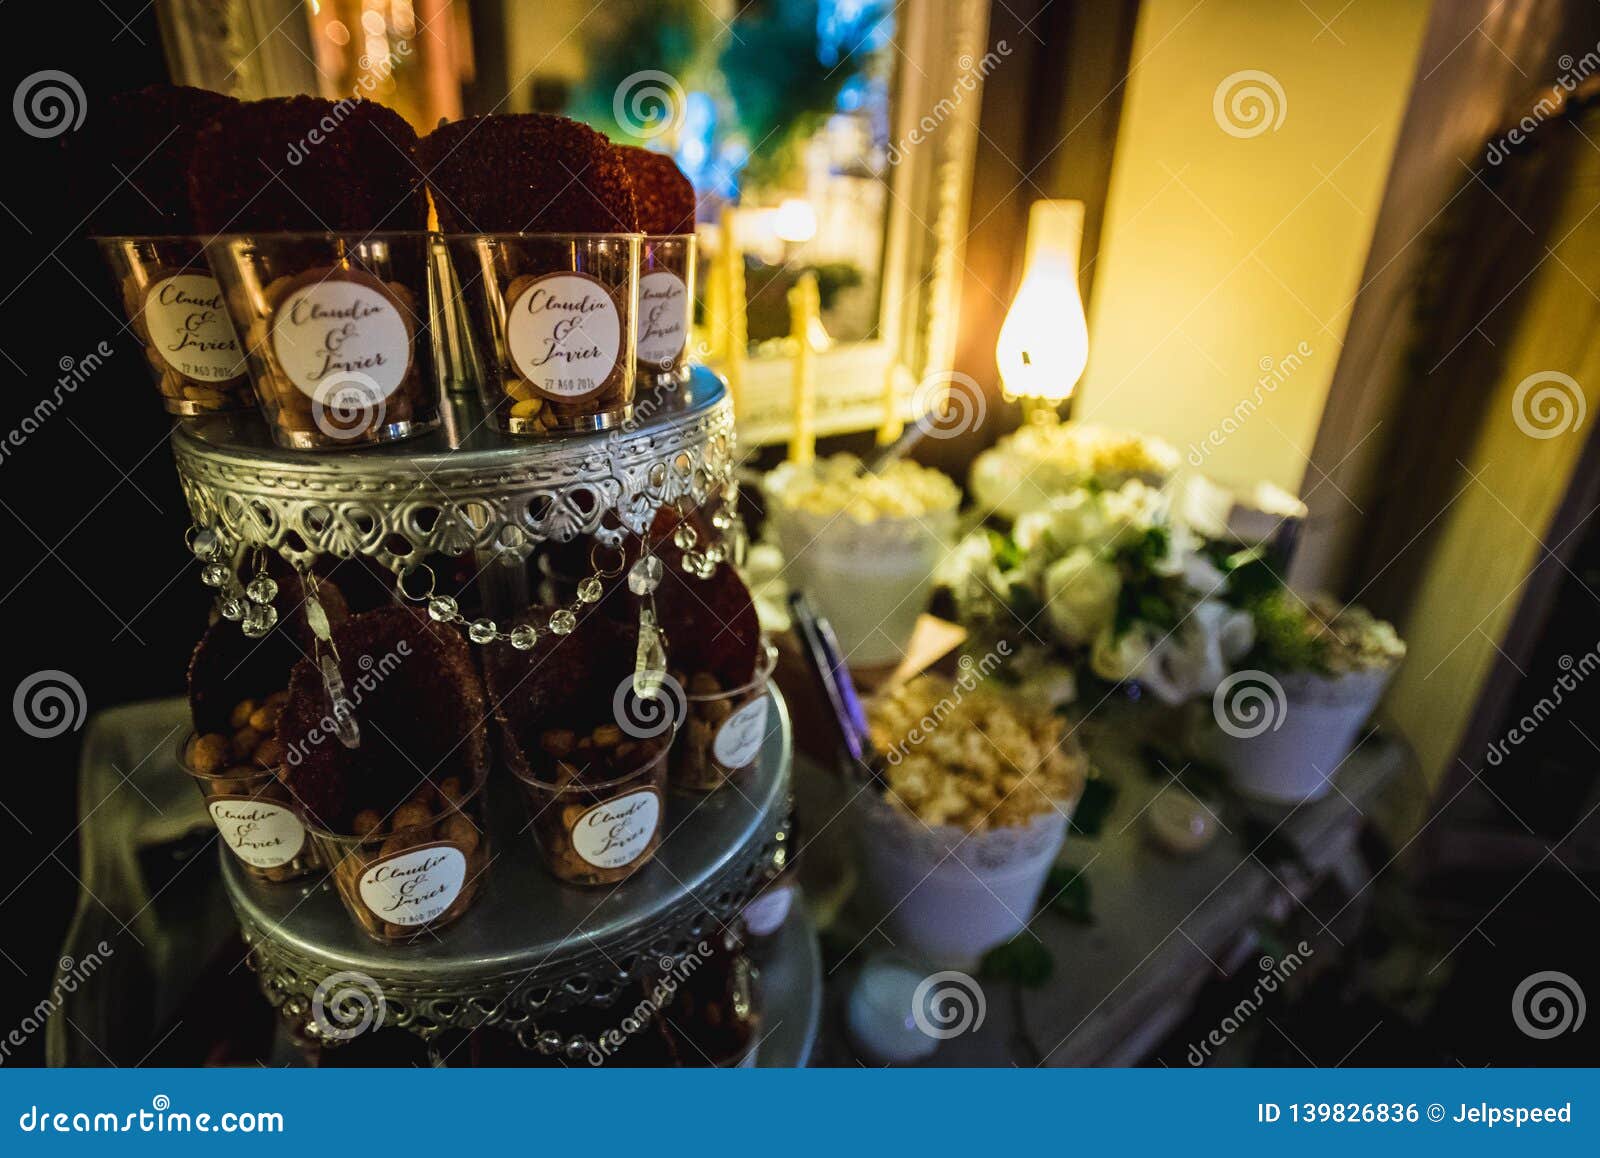 decorated wedding table with candy bar